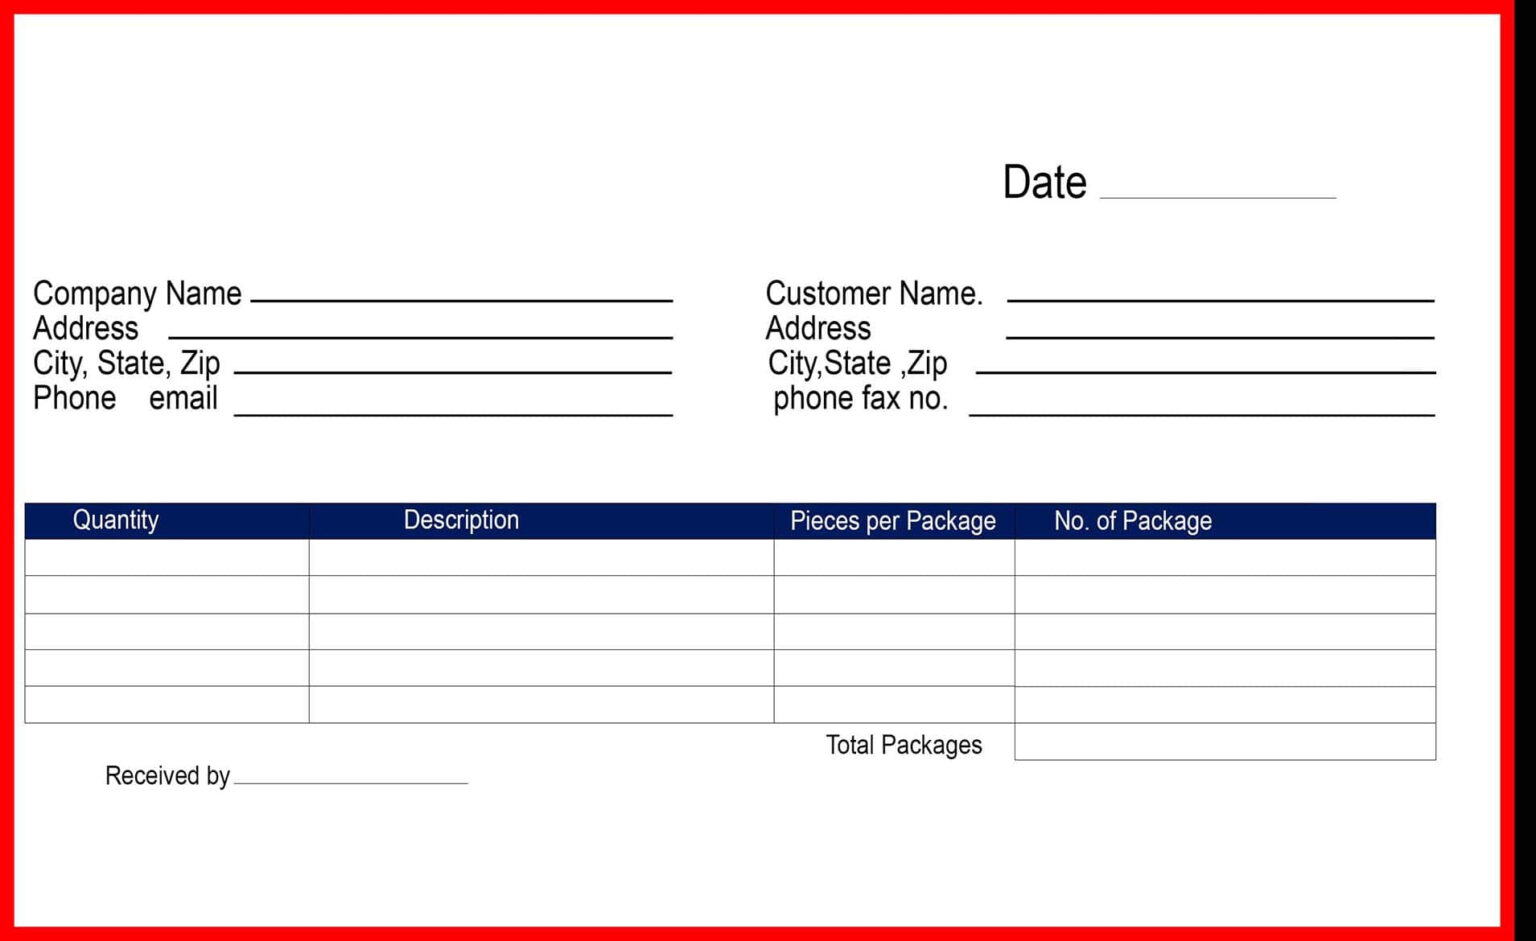 Free Delivery Receipt Template Pdf Word Doc Excel The Throughout